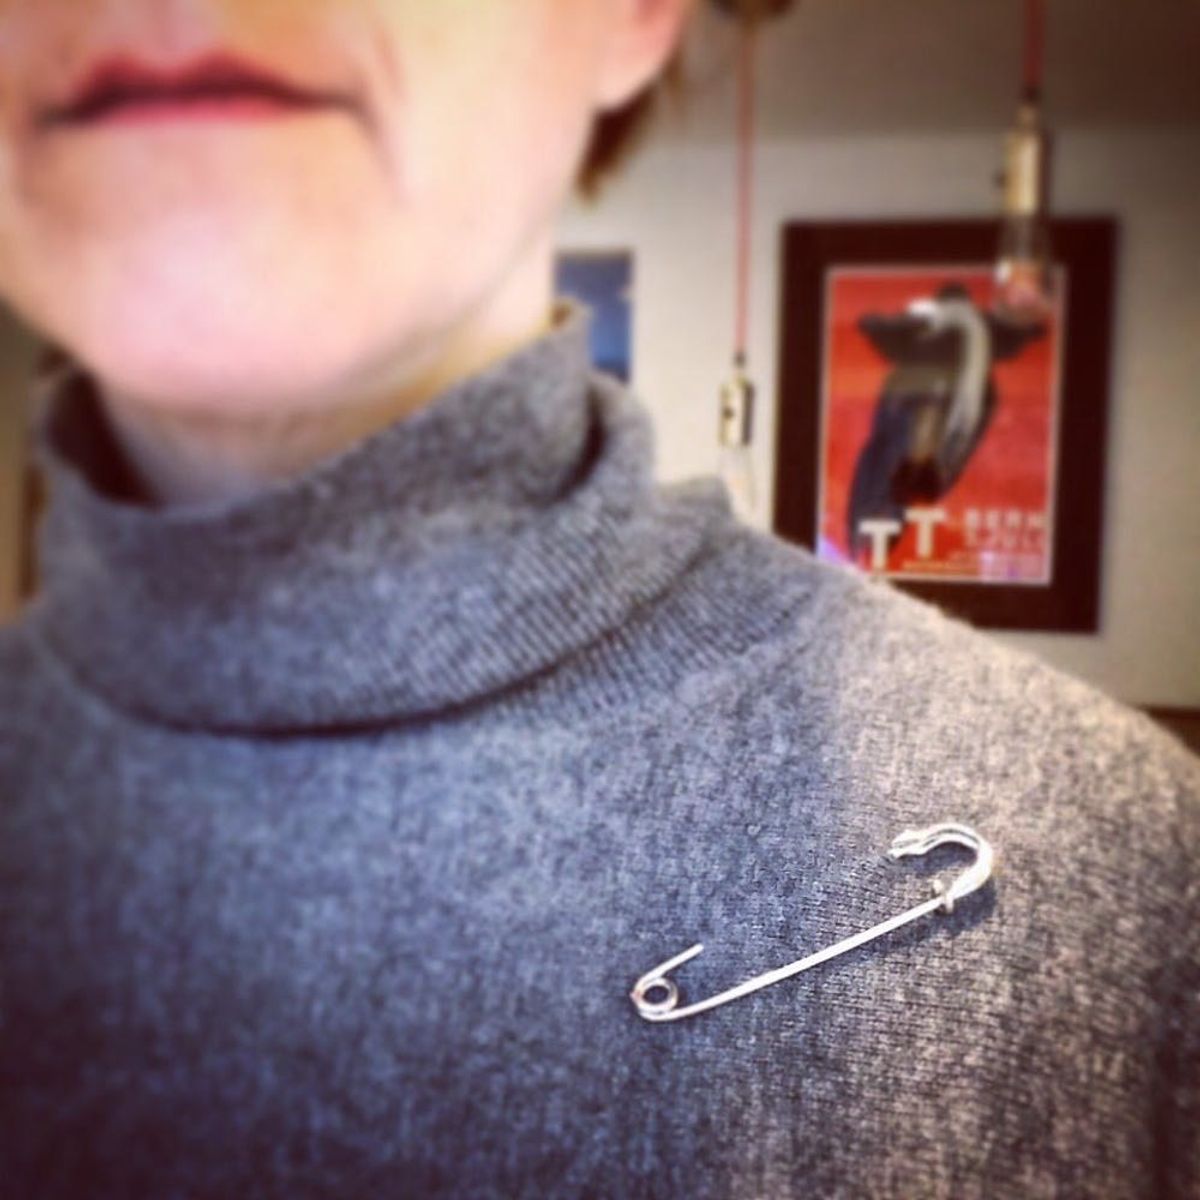 Find Out Why People Are Wearing Safety Pins As a Sign of Support After the Election